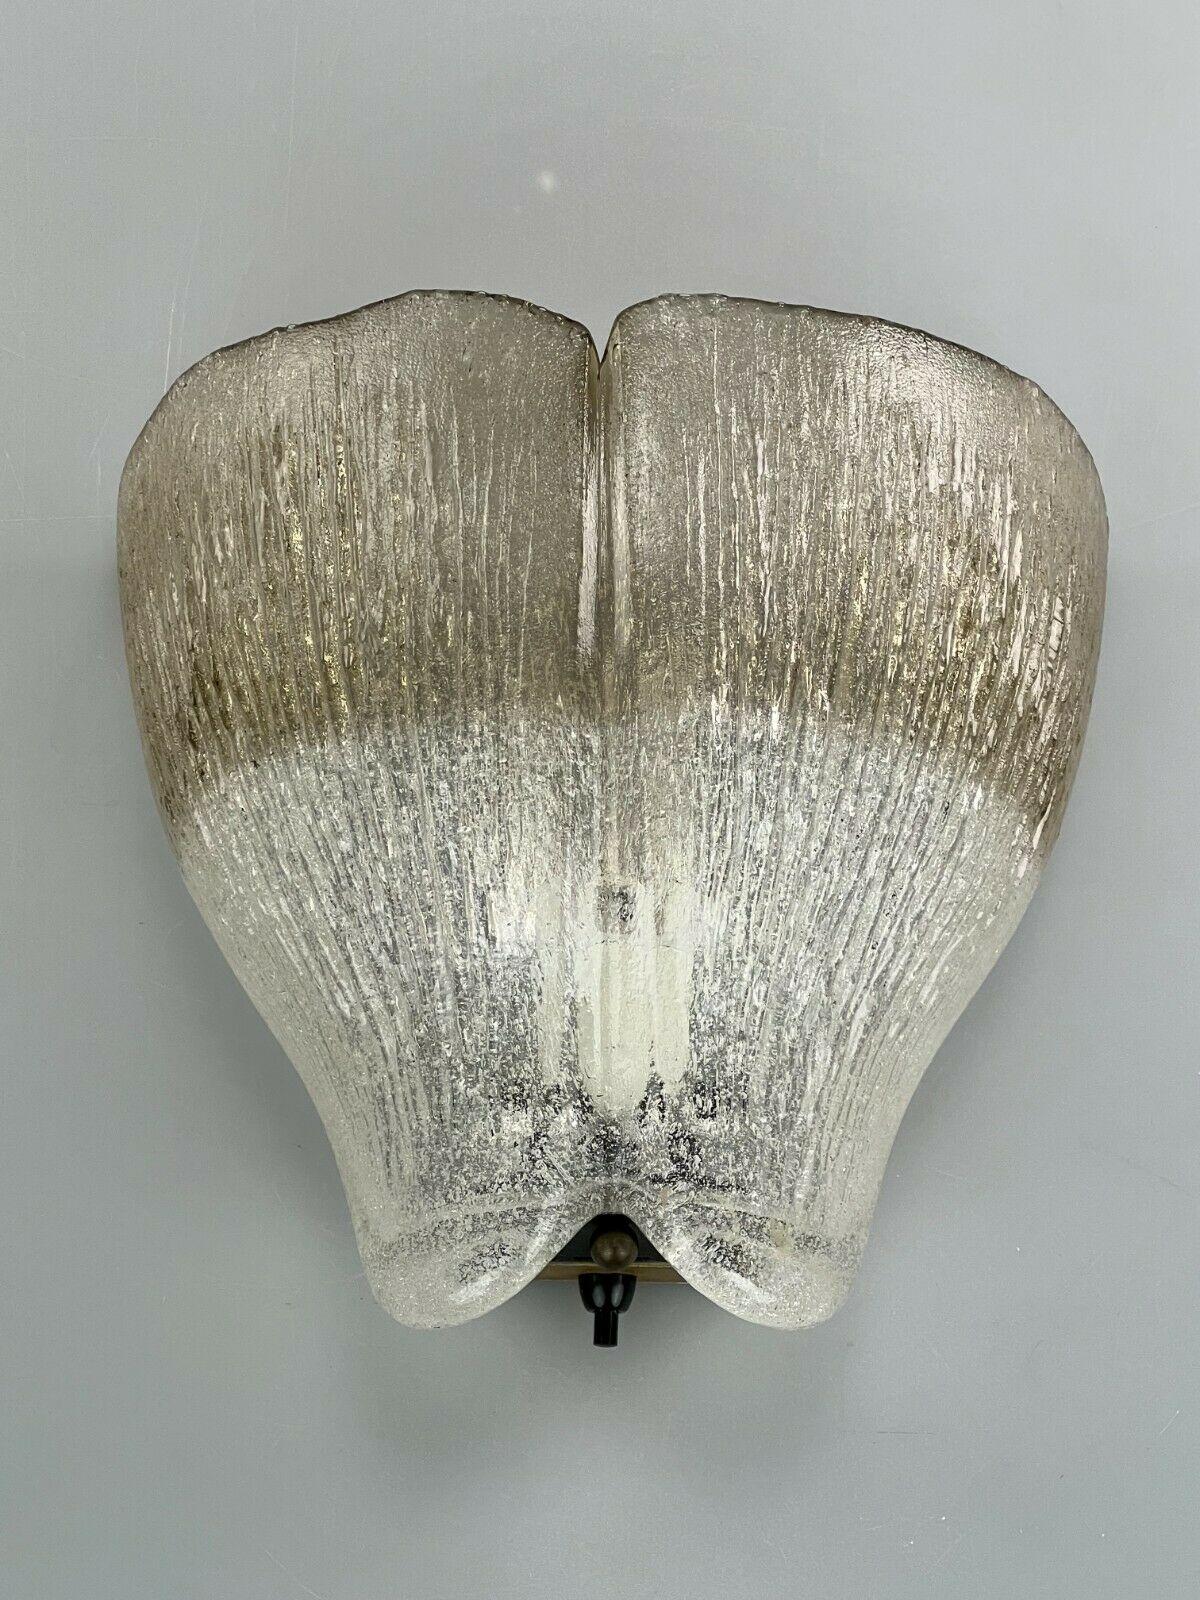 60s 70s Peill & Putzler wall lamp glass space design lamp 60s.

Object: lamp

Manufacturer: Peill & Putzler

Condition: good

Age: around 1960-1970

Dimensions:

26.5cm x 24.5cm x 15cm

Other notes:

The pictures serve as part of the